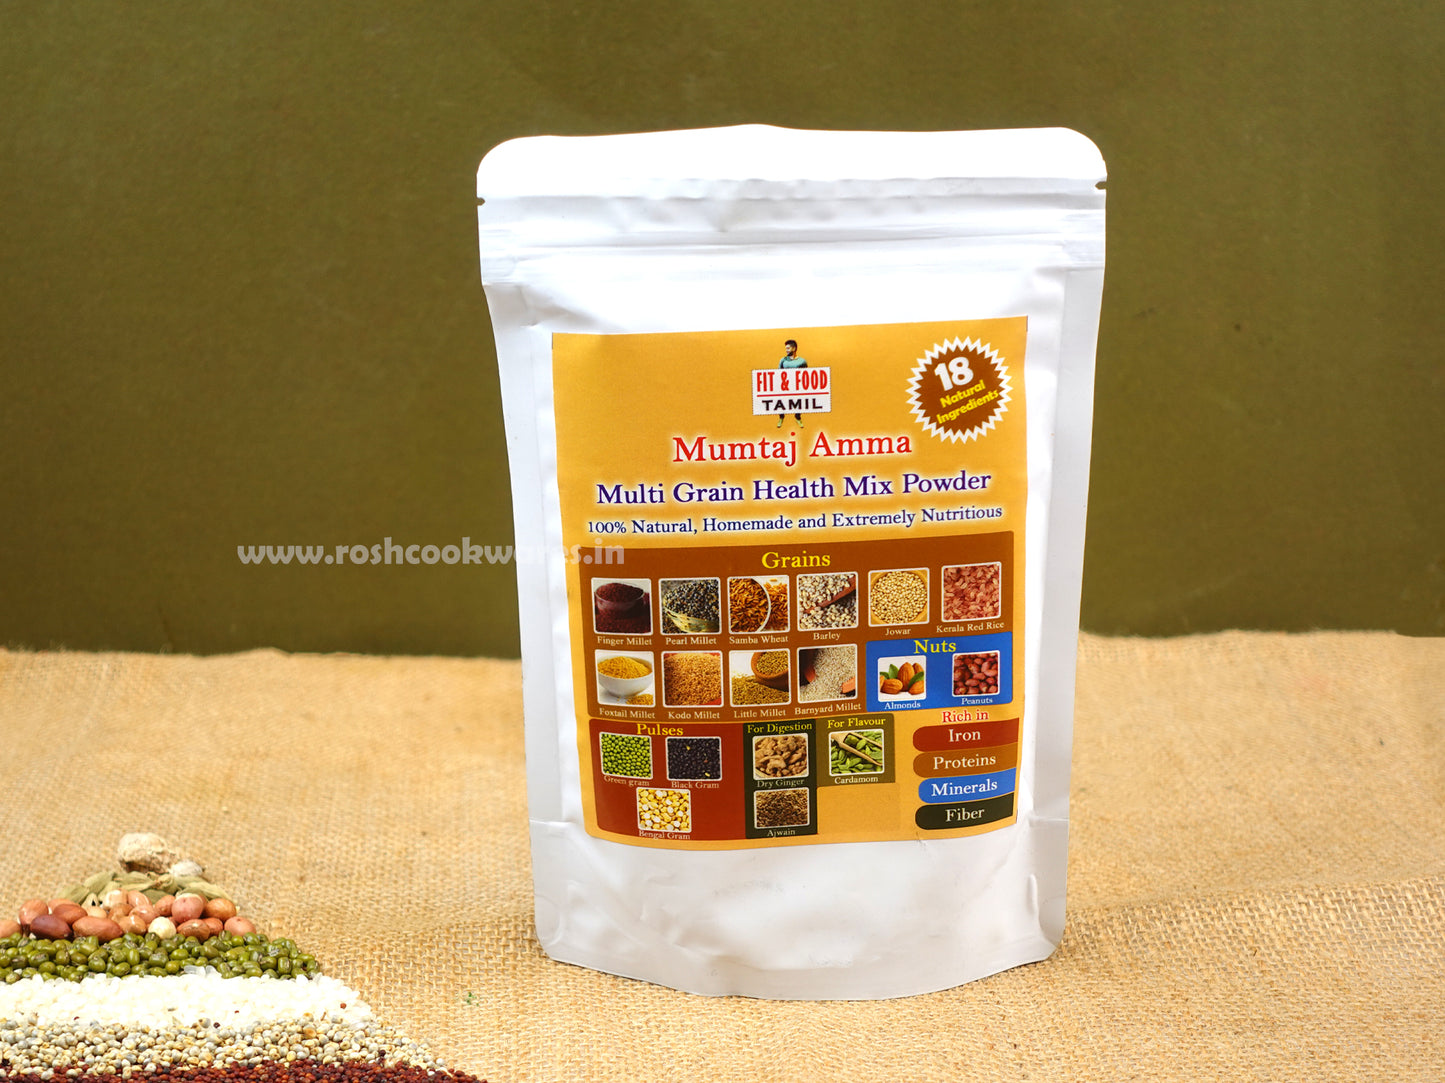 Multi Grain Health Mix Powder - 18 Natural Ingredients. (Home Made From Fit & Food).